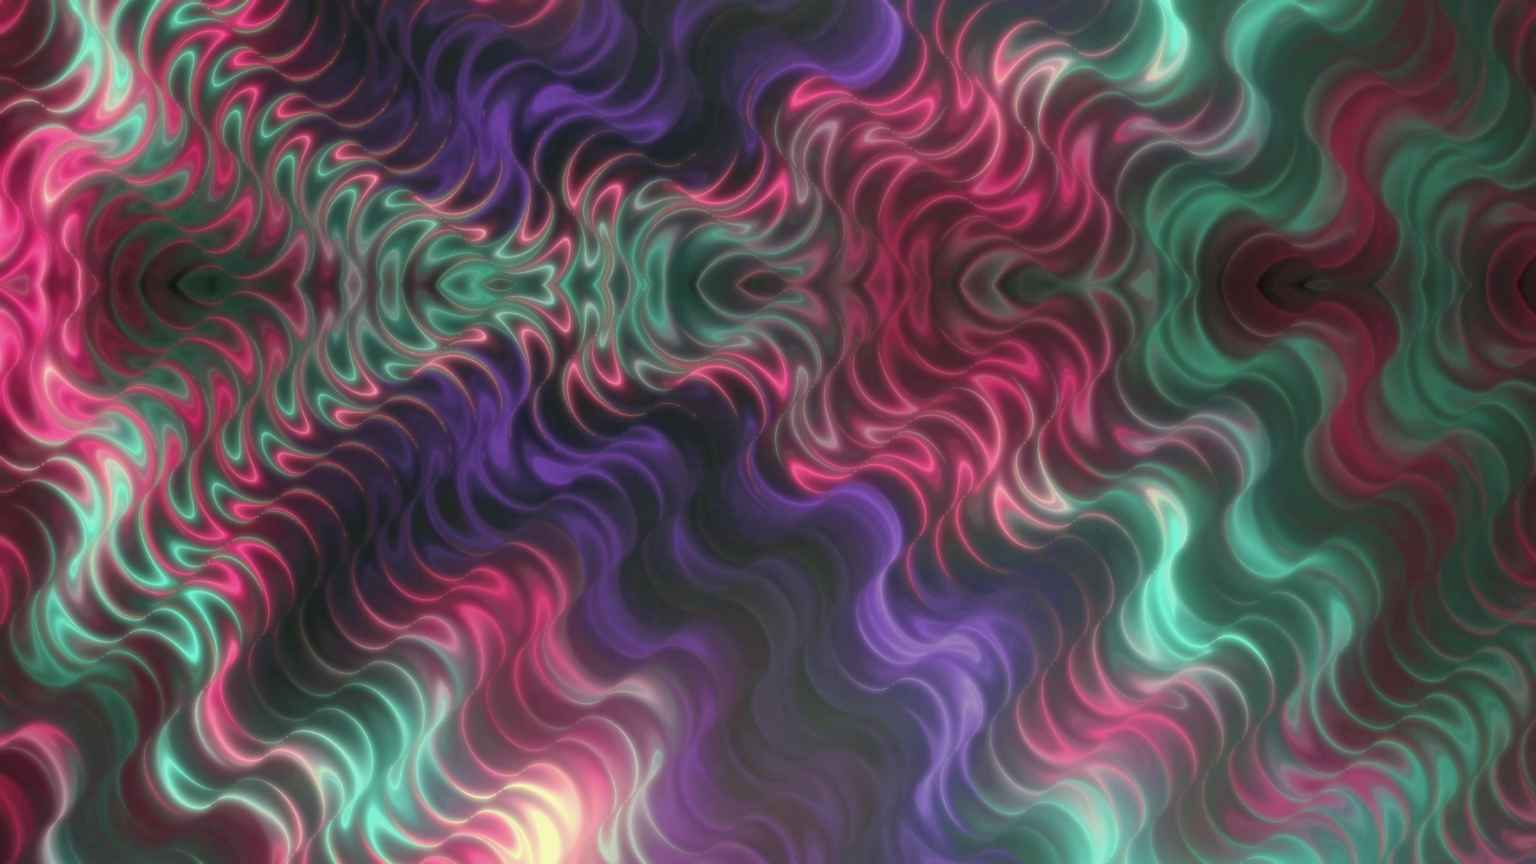 4K Colorful Wavy Screensaver Looped || VFX Free To Use 4K Motion Background || FREE DOWNLOAD